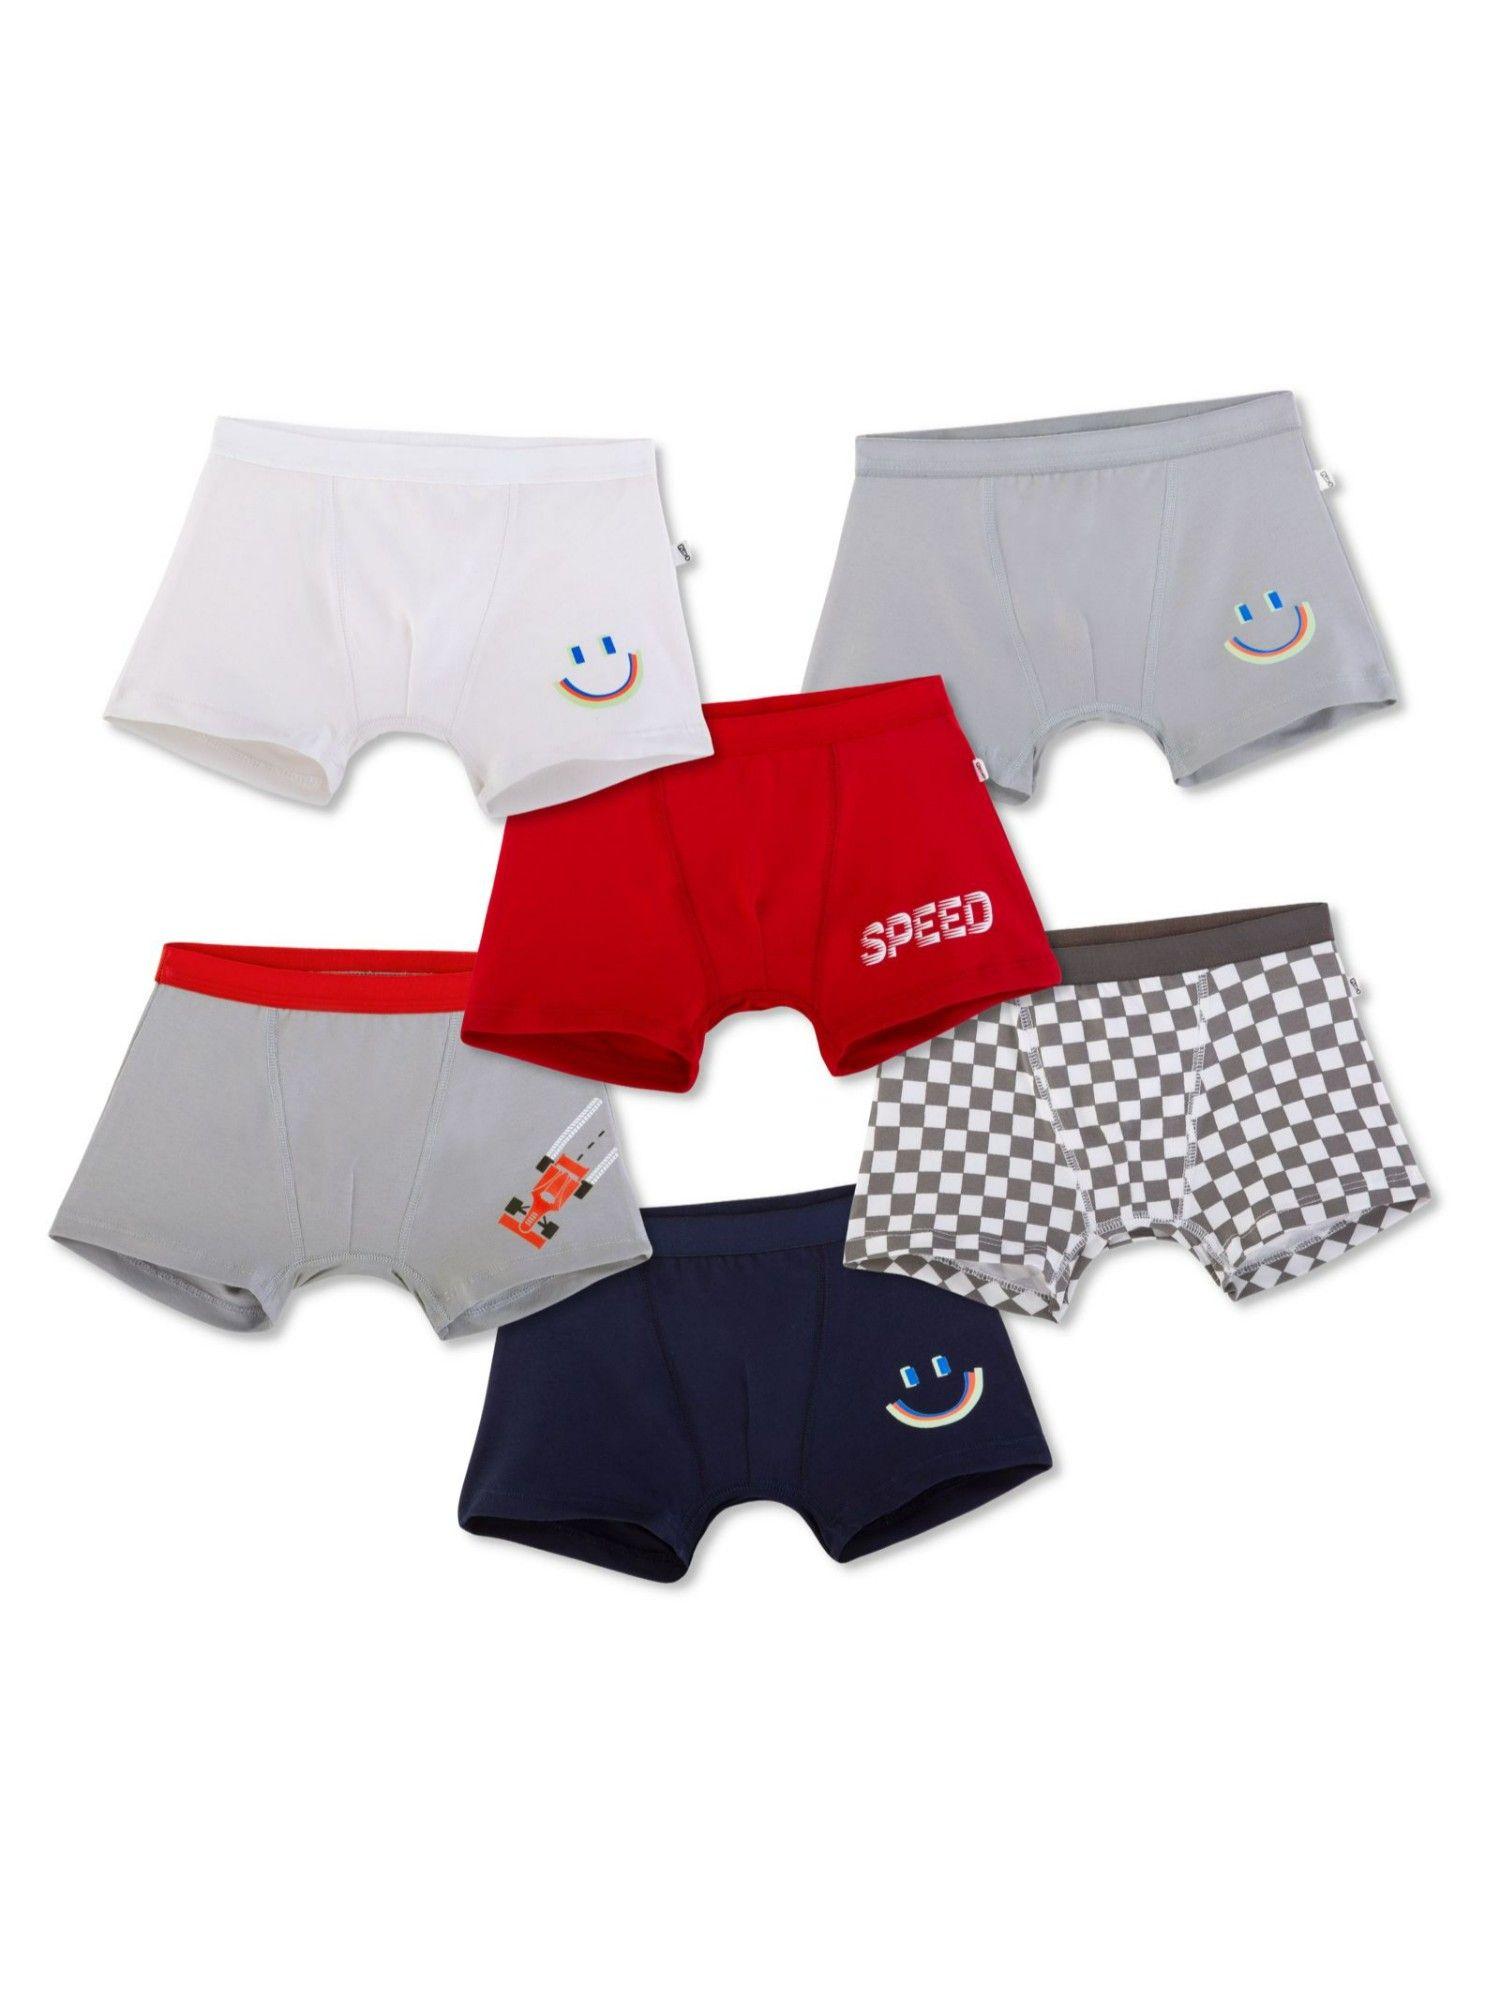 mixed bag boy trunks (pack of 6)